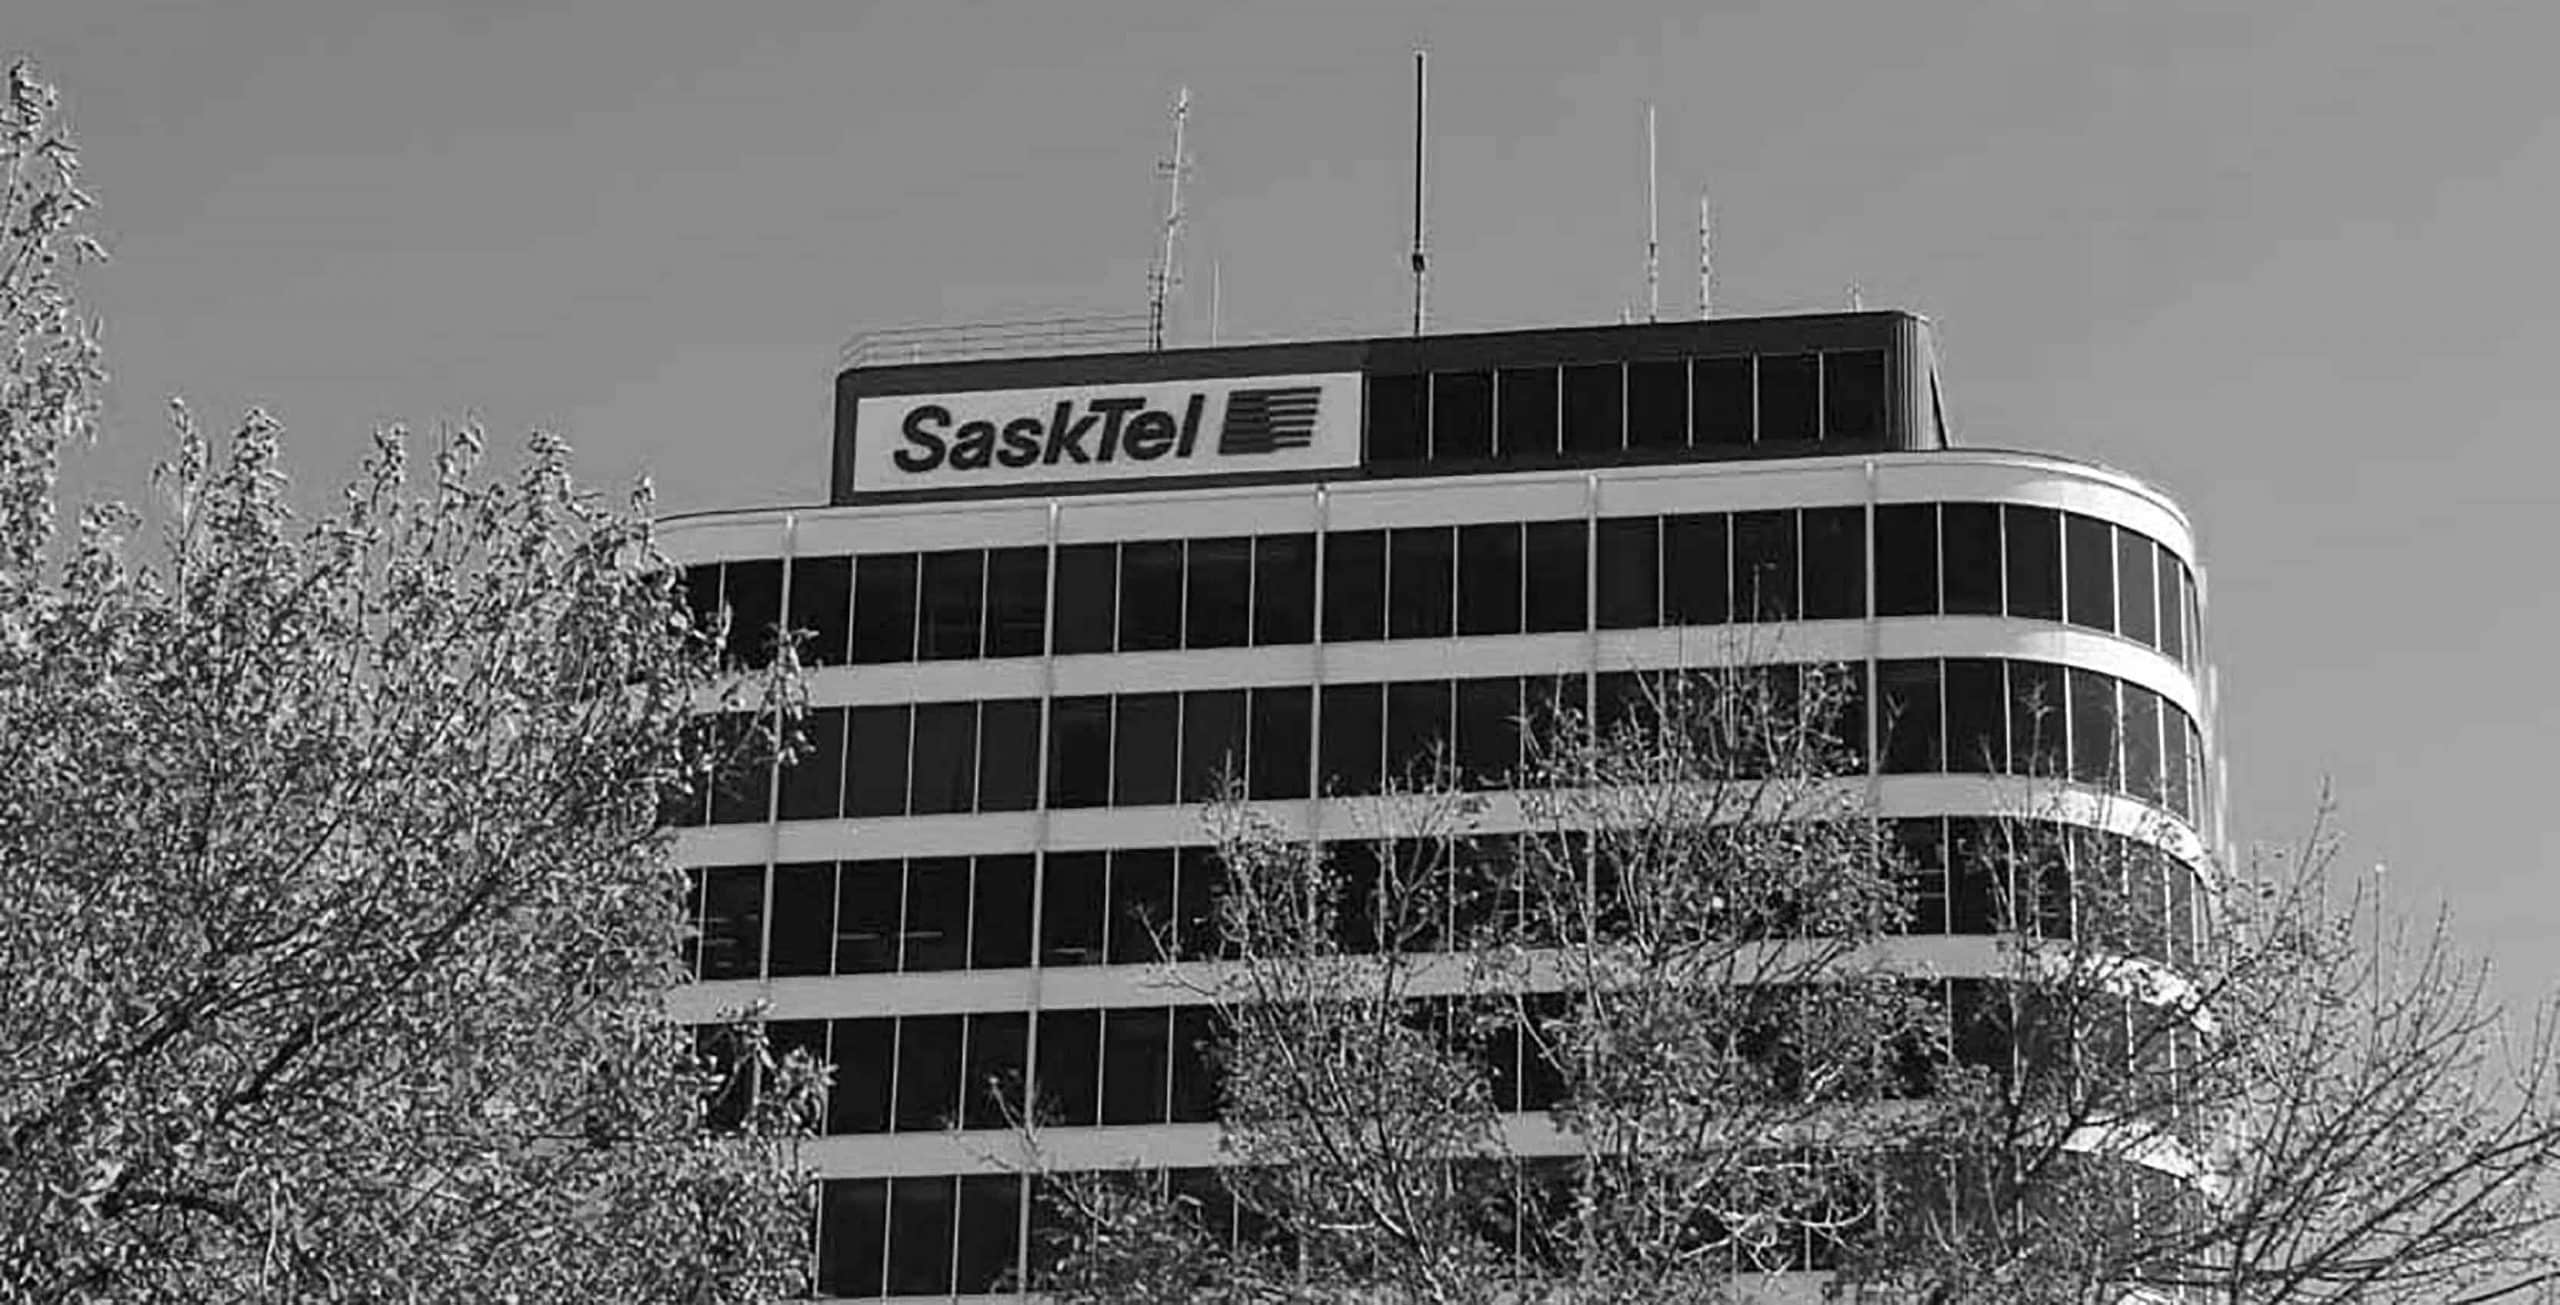 SaskTel is the leading Information and Communications Technology (ICT) provider in Saskatchewan